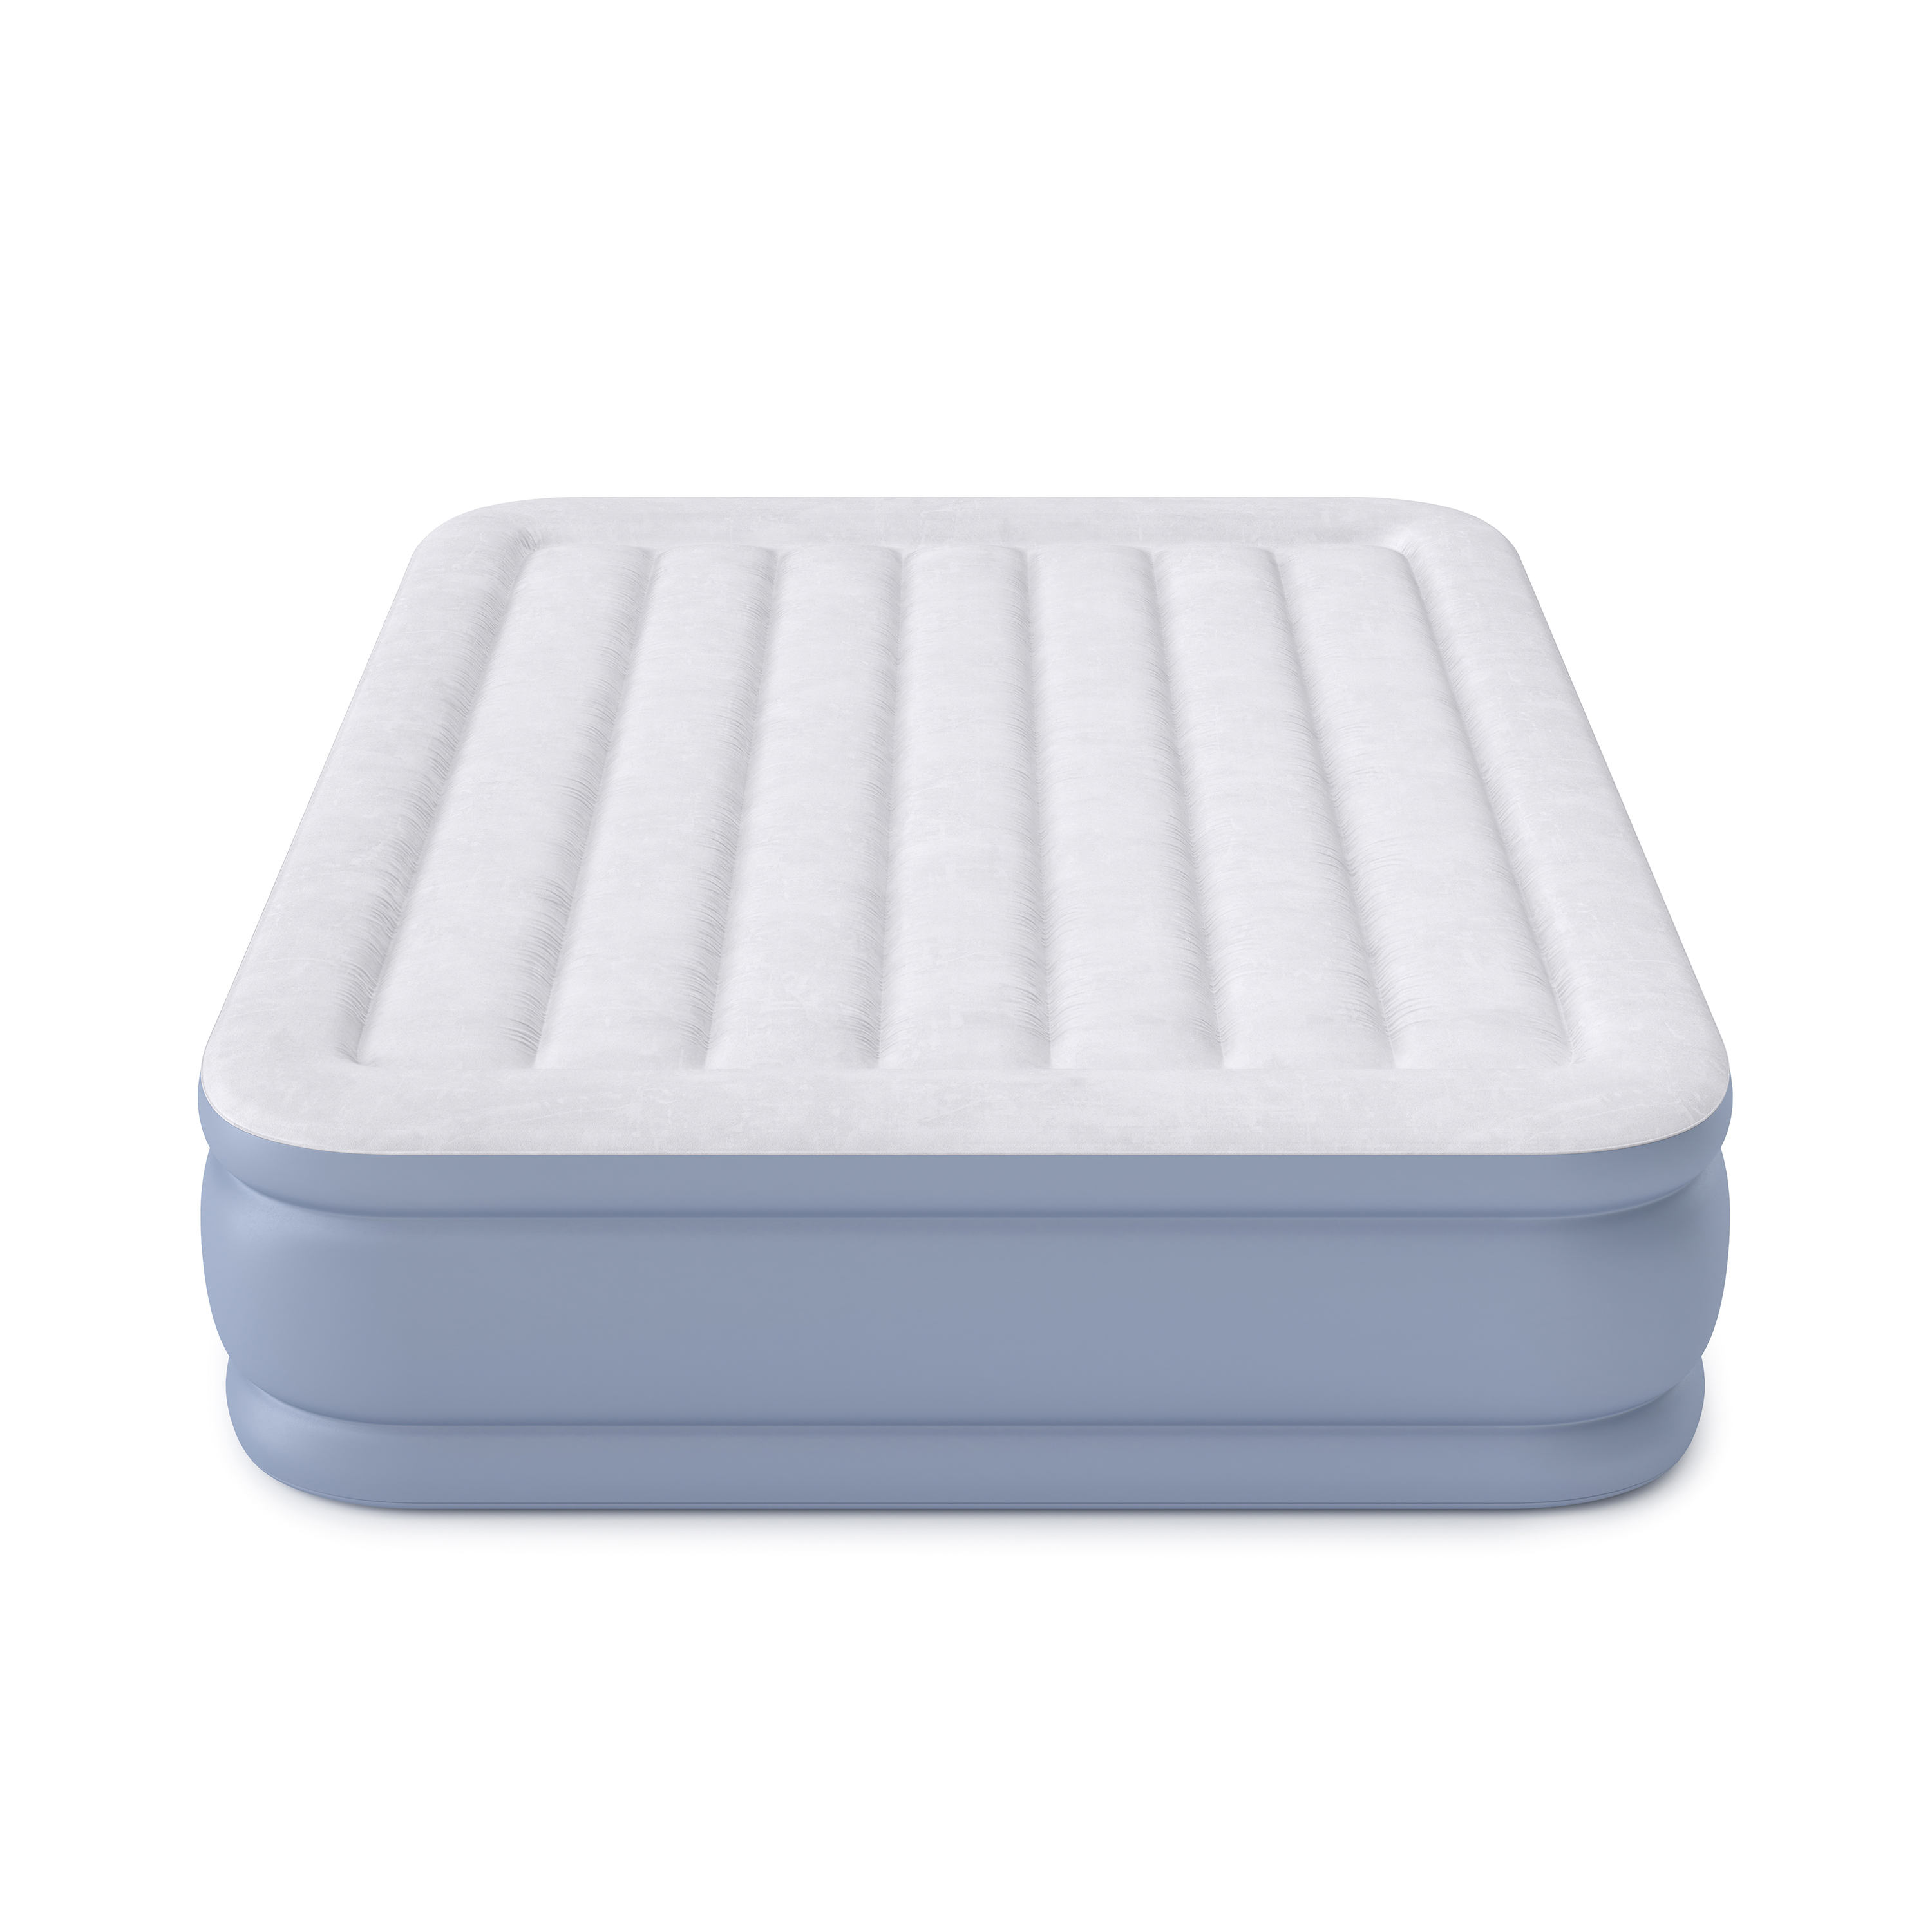 Beautyrest Hi Loft 16" Full Air Bed Mattress, Raised Inflatable Blow-Up Bed, Powerful Pump, Adjustable Firmness - image 5 of 12